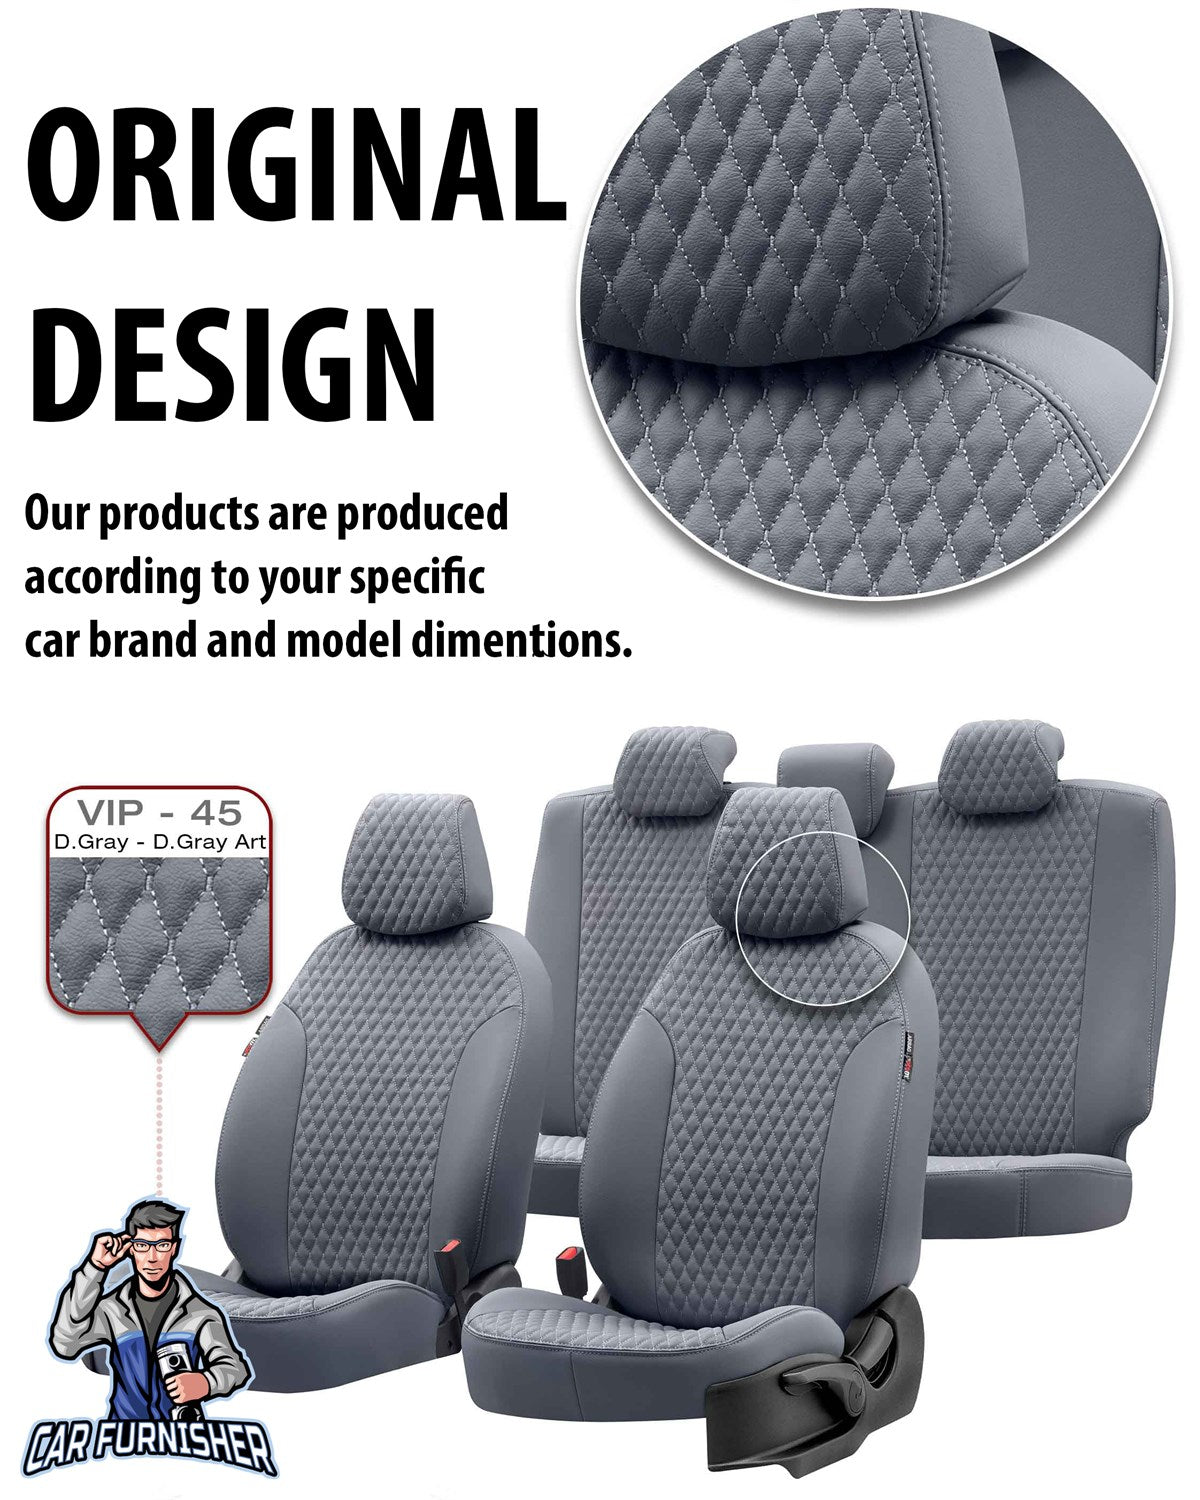 Kia Ceed Seat Covers Amsterdam Leather Design Smoked Black Leather